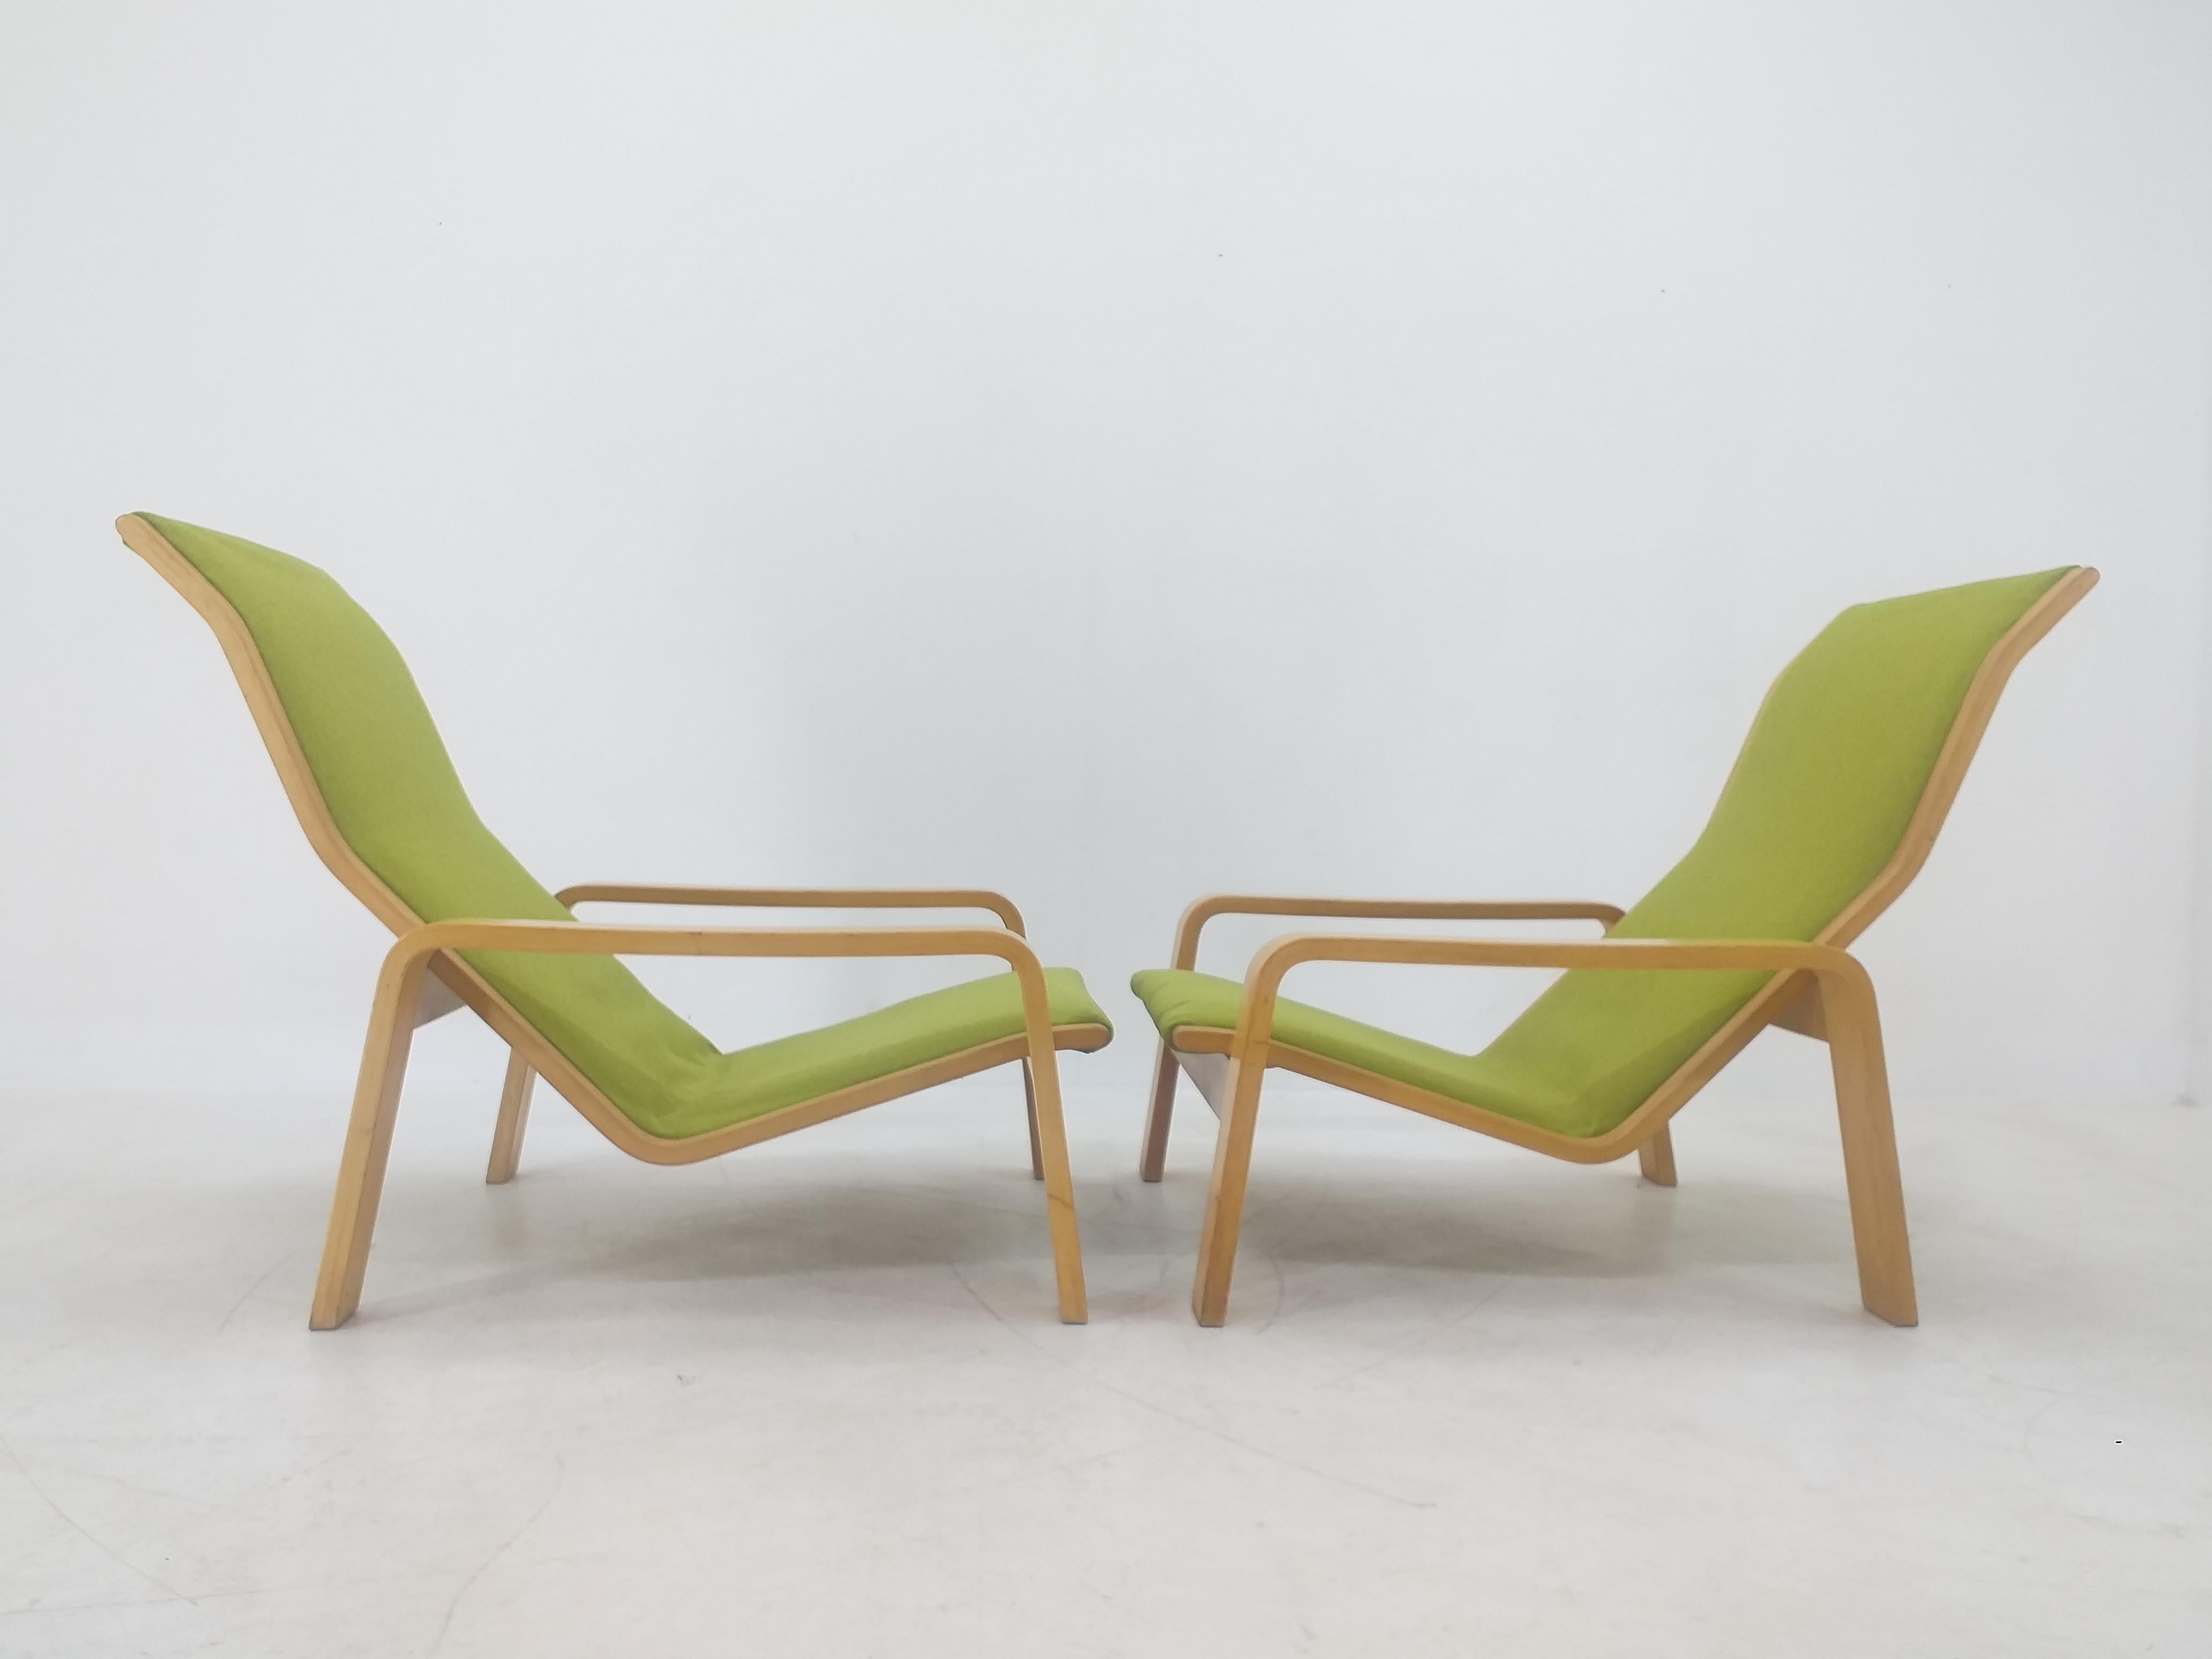 Pair of Lounge Chairs Pulkka, Ilmari Lappalainen for ASKO, Finland, 1970s For Sale 3